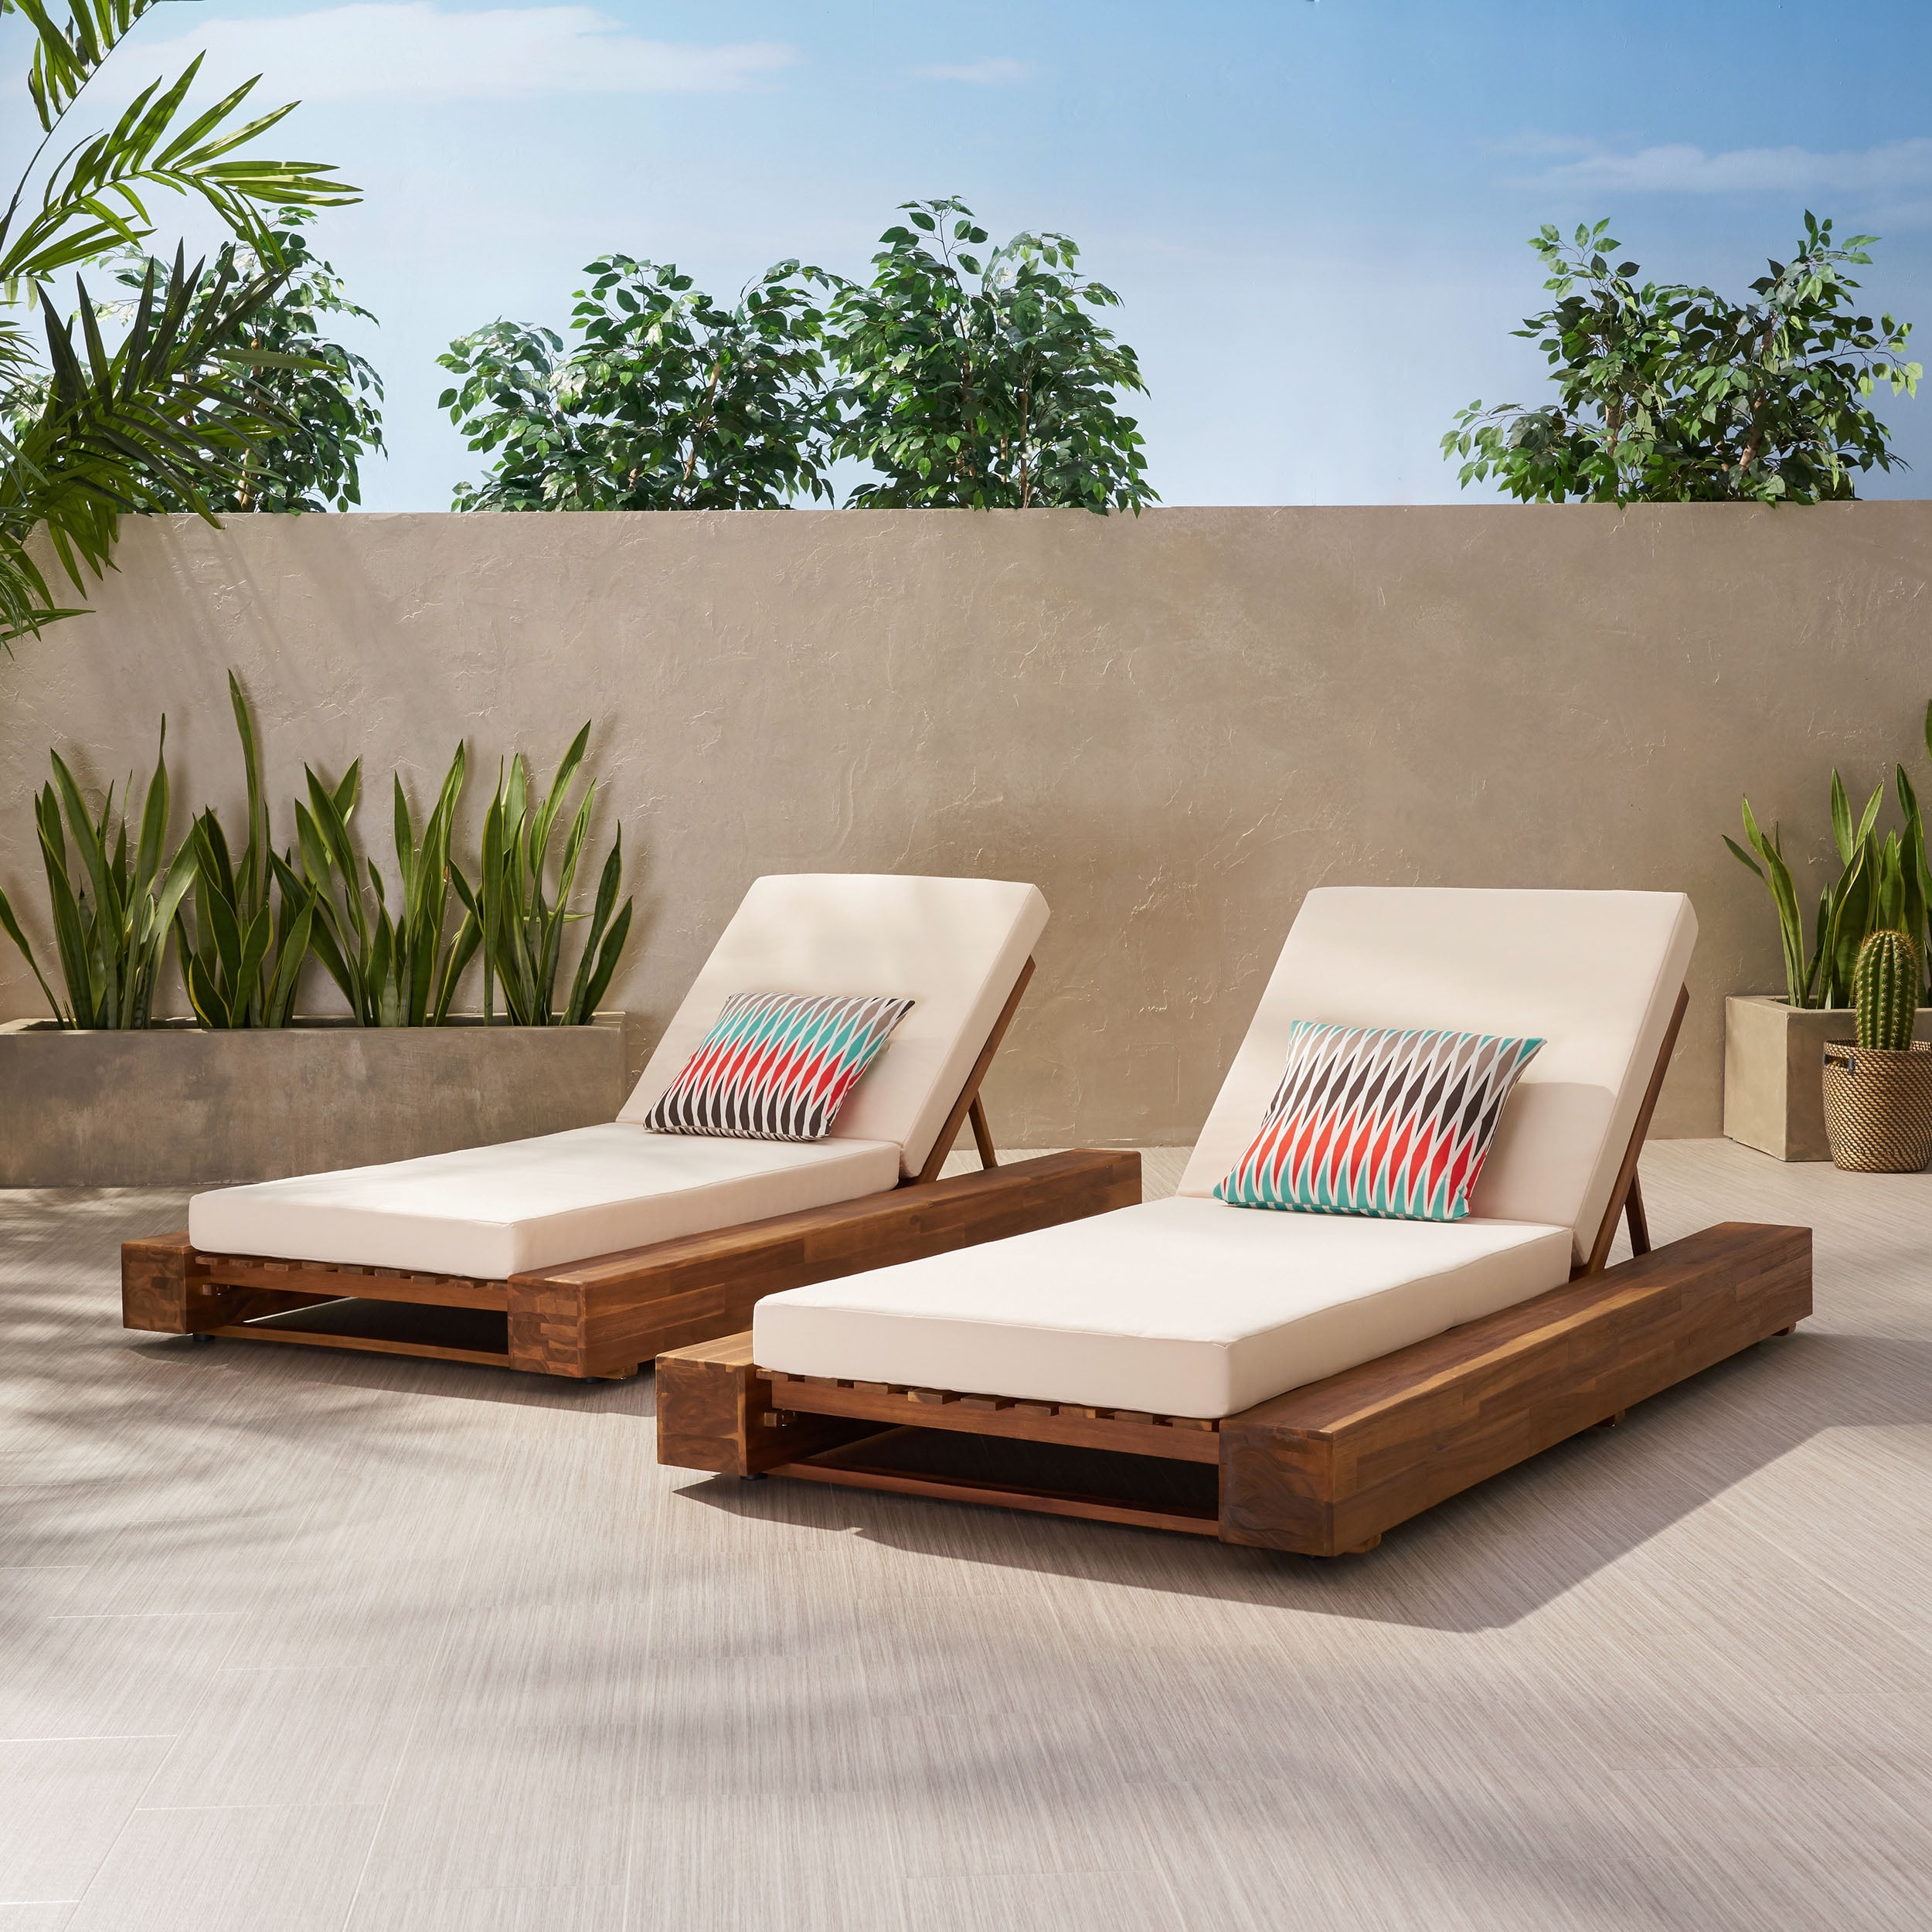 Create A Stylish Outdoor Oasis With Teak Furniture